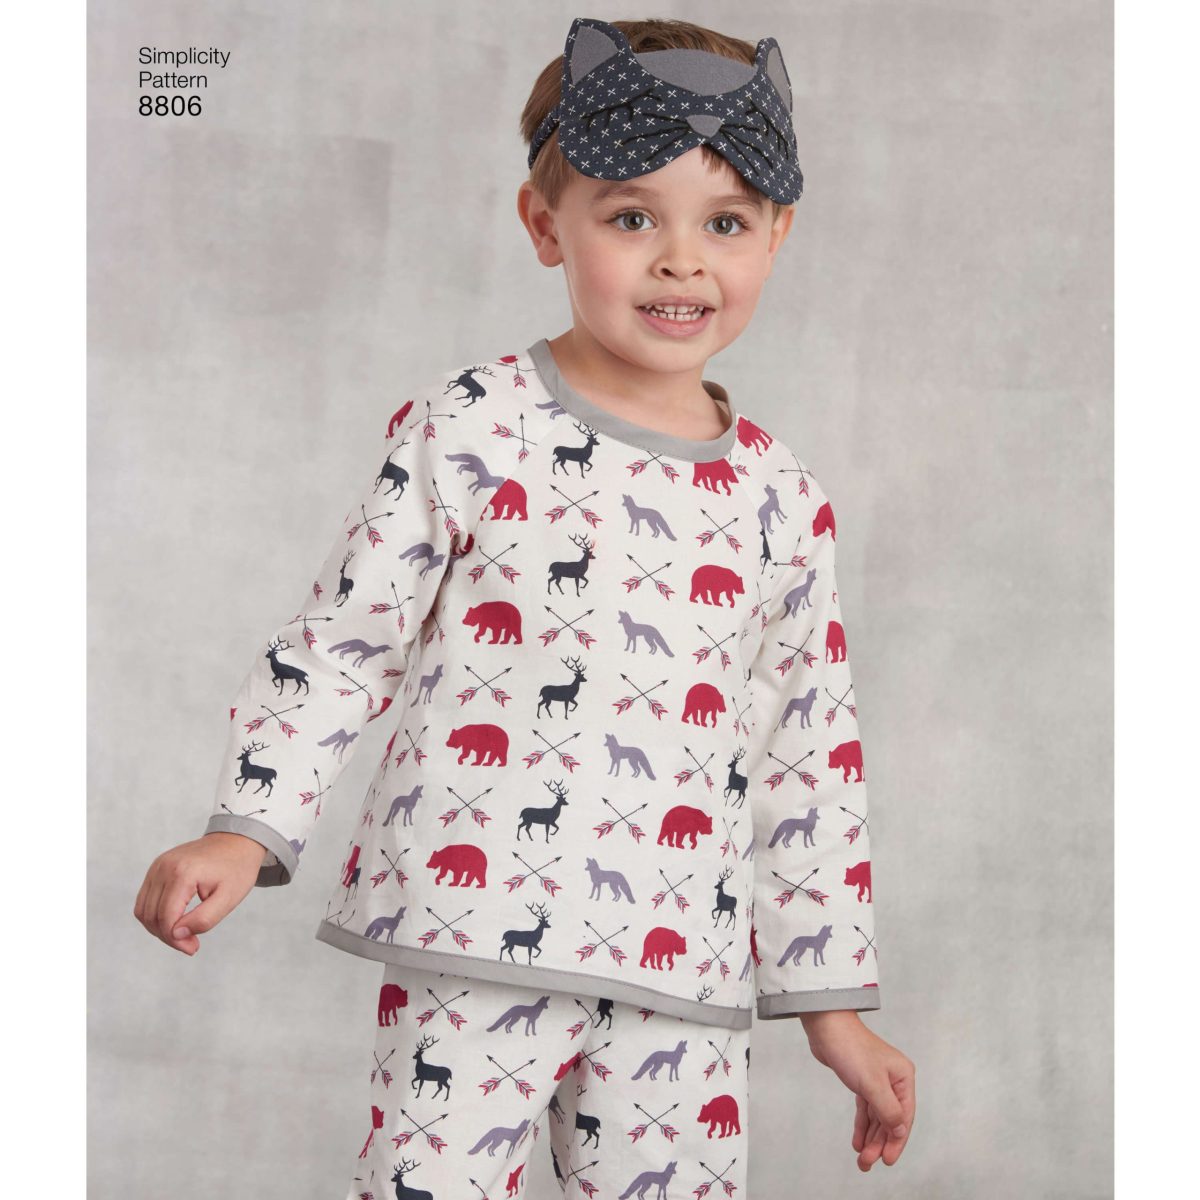 Simplicity Sewing Pattern 8806 Child's Dress, Top, Trousers, Eye Mask and Slippers